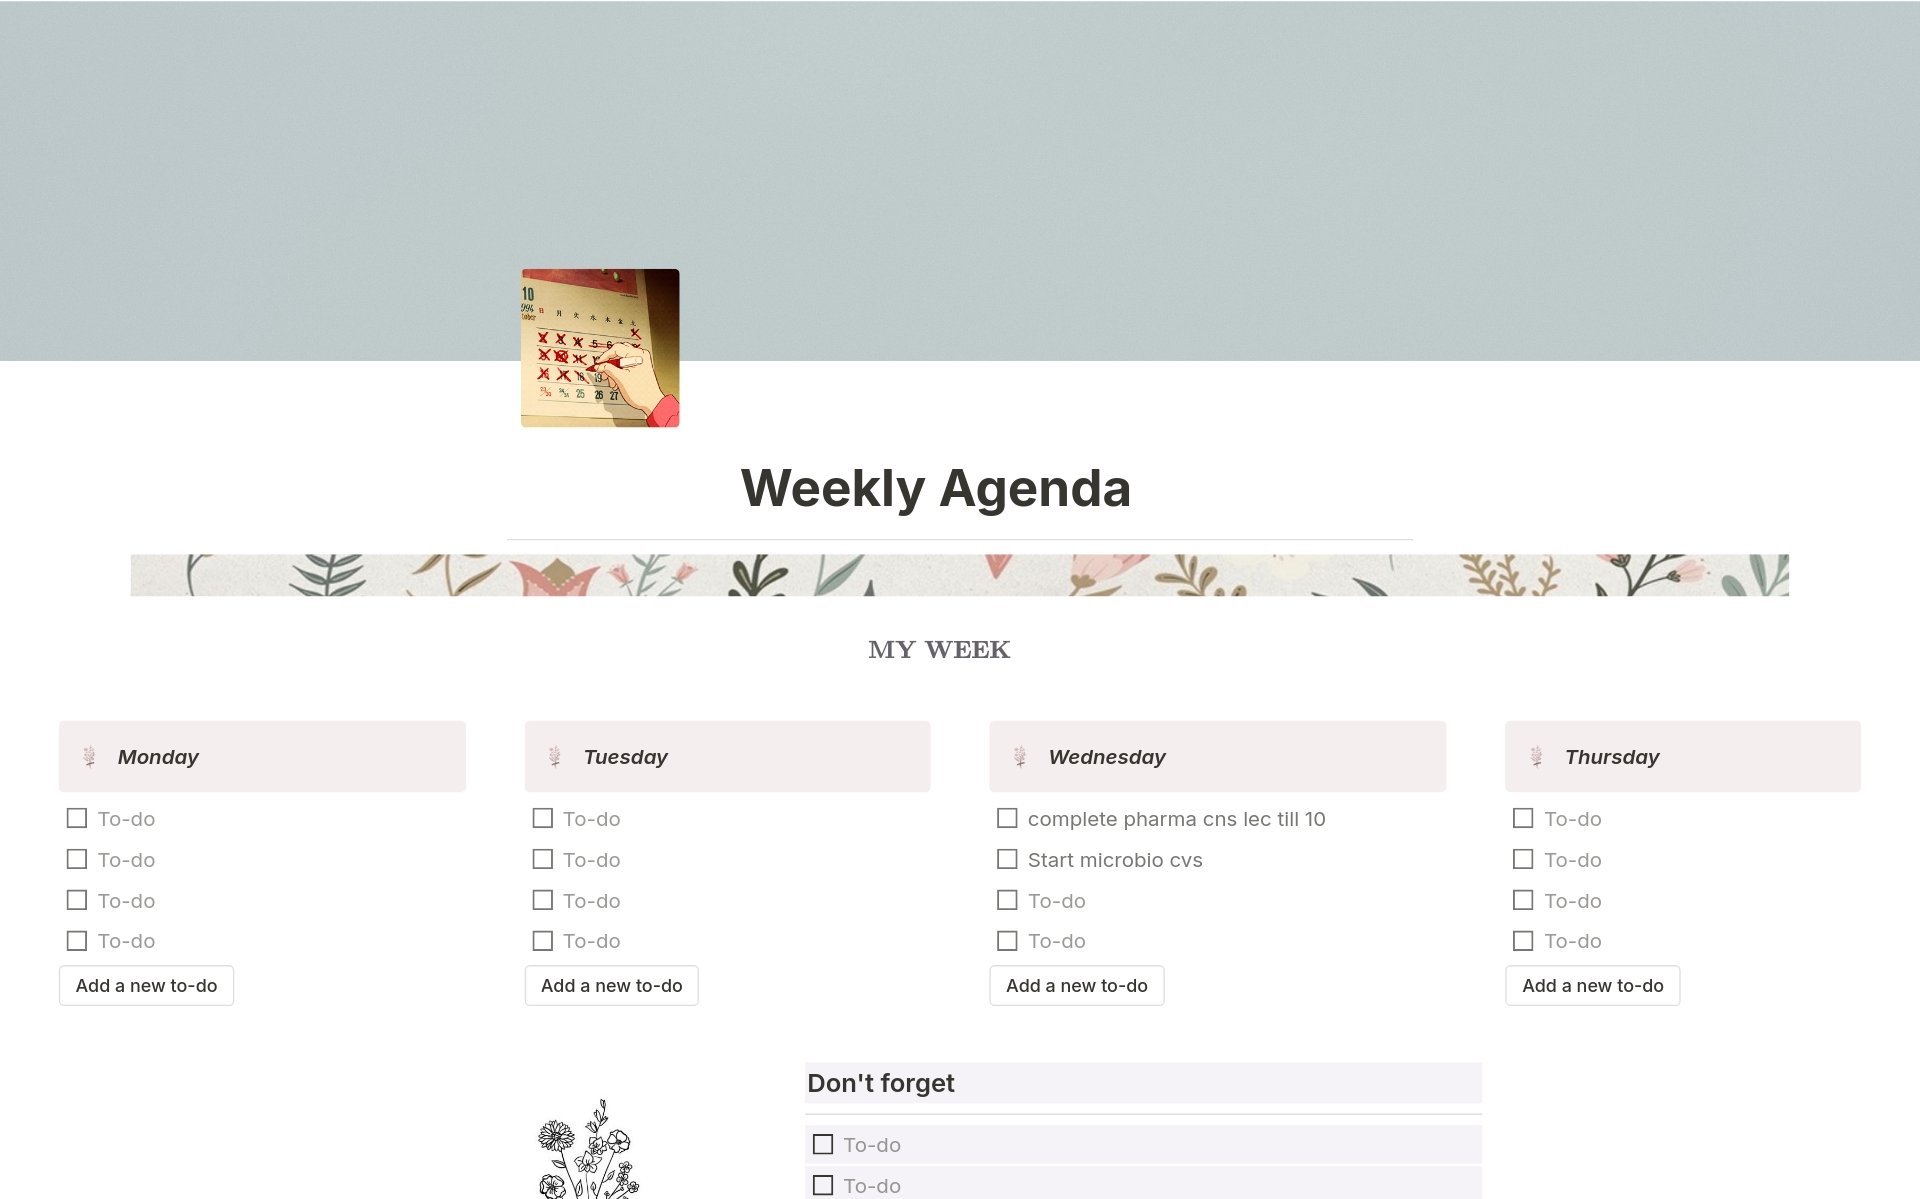 This minimalist yet aesthetic planner helps to organise your week and spend it productively.